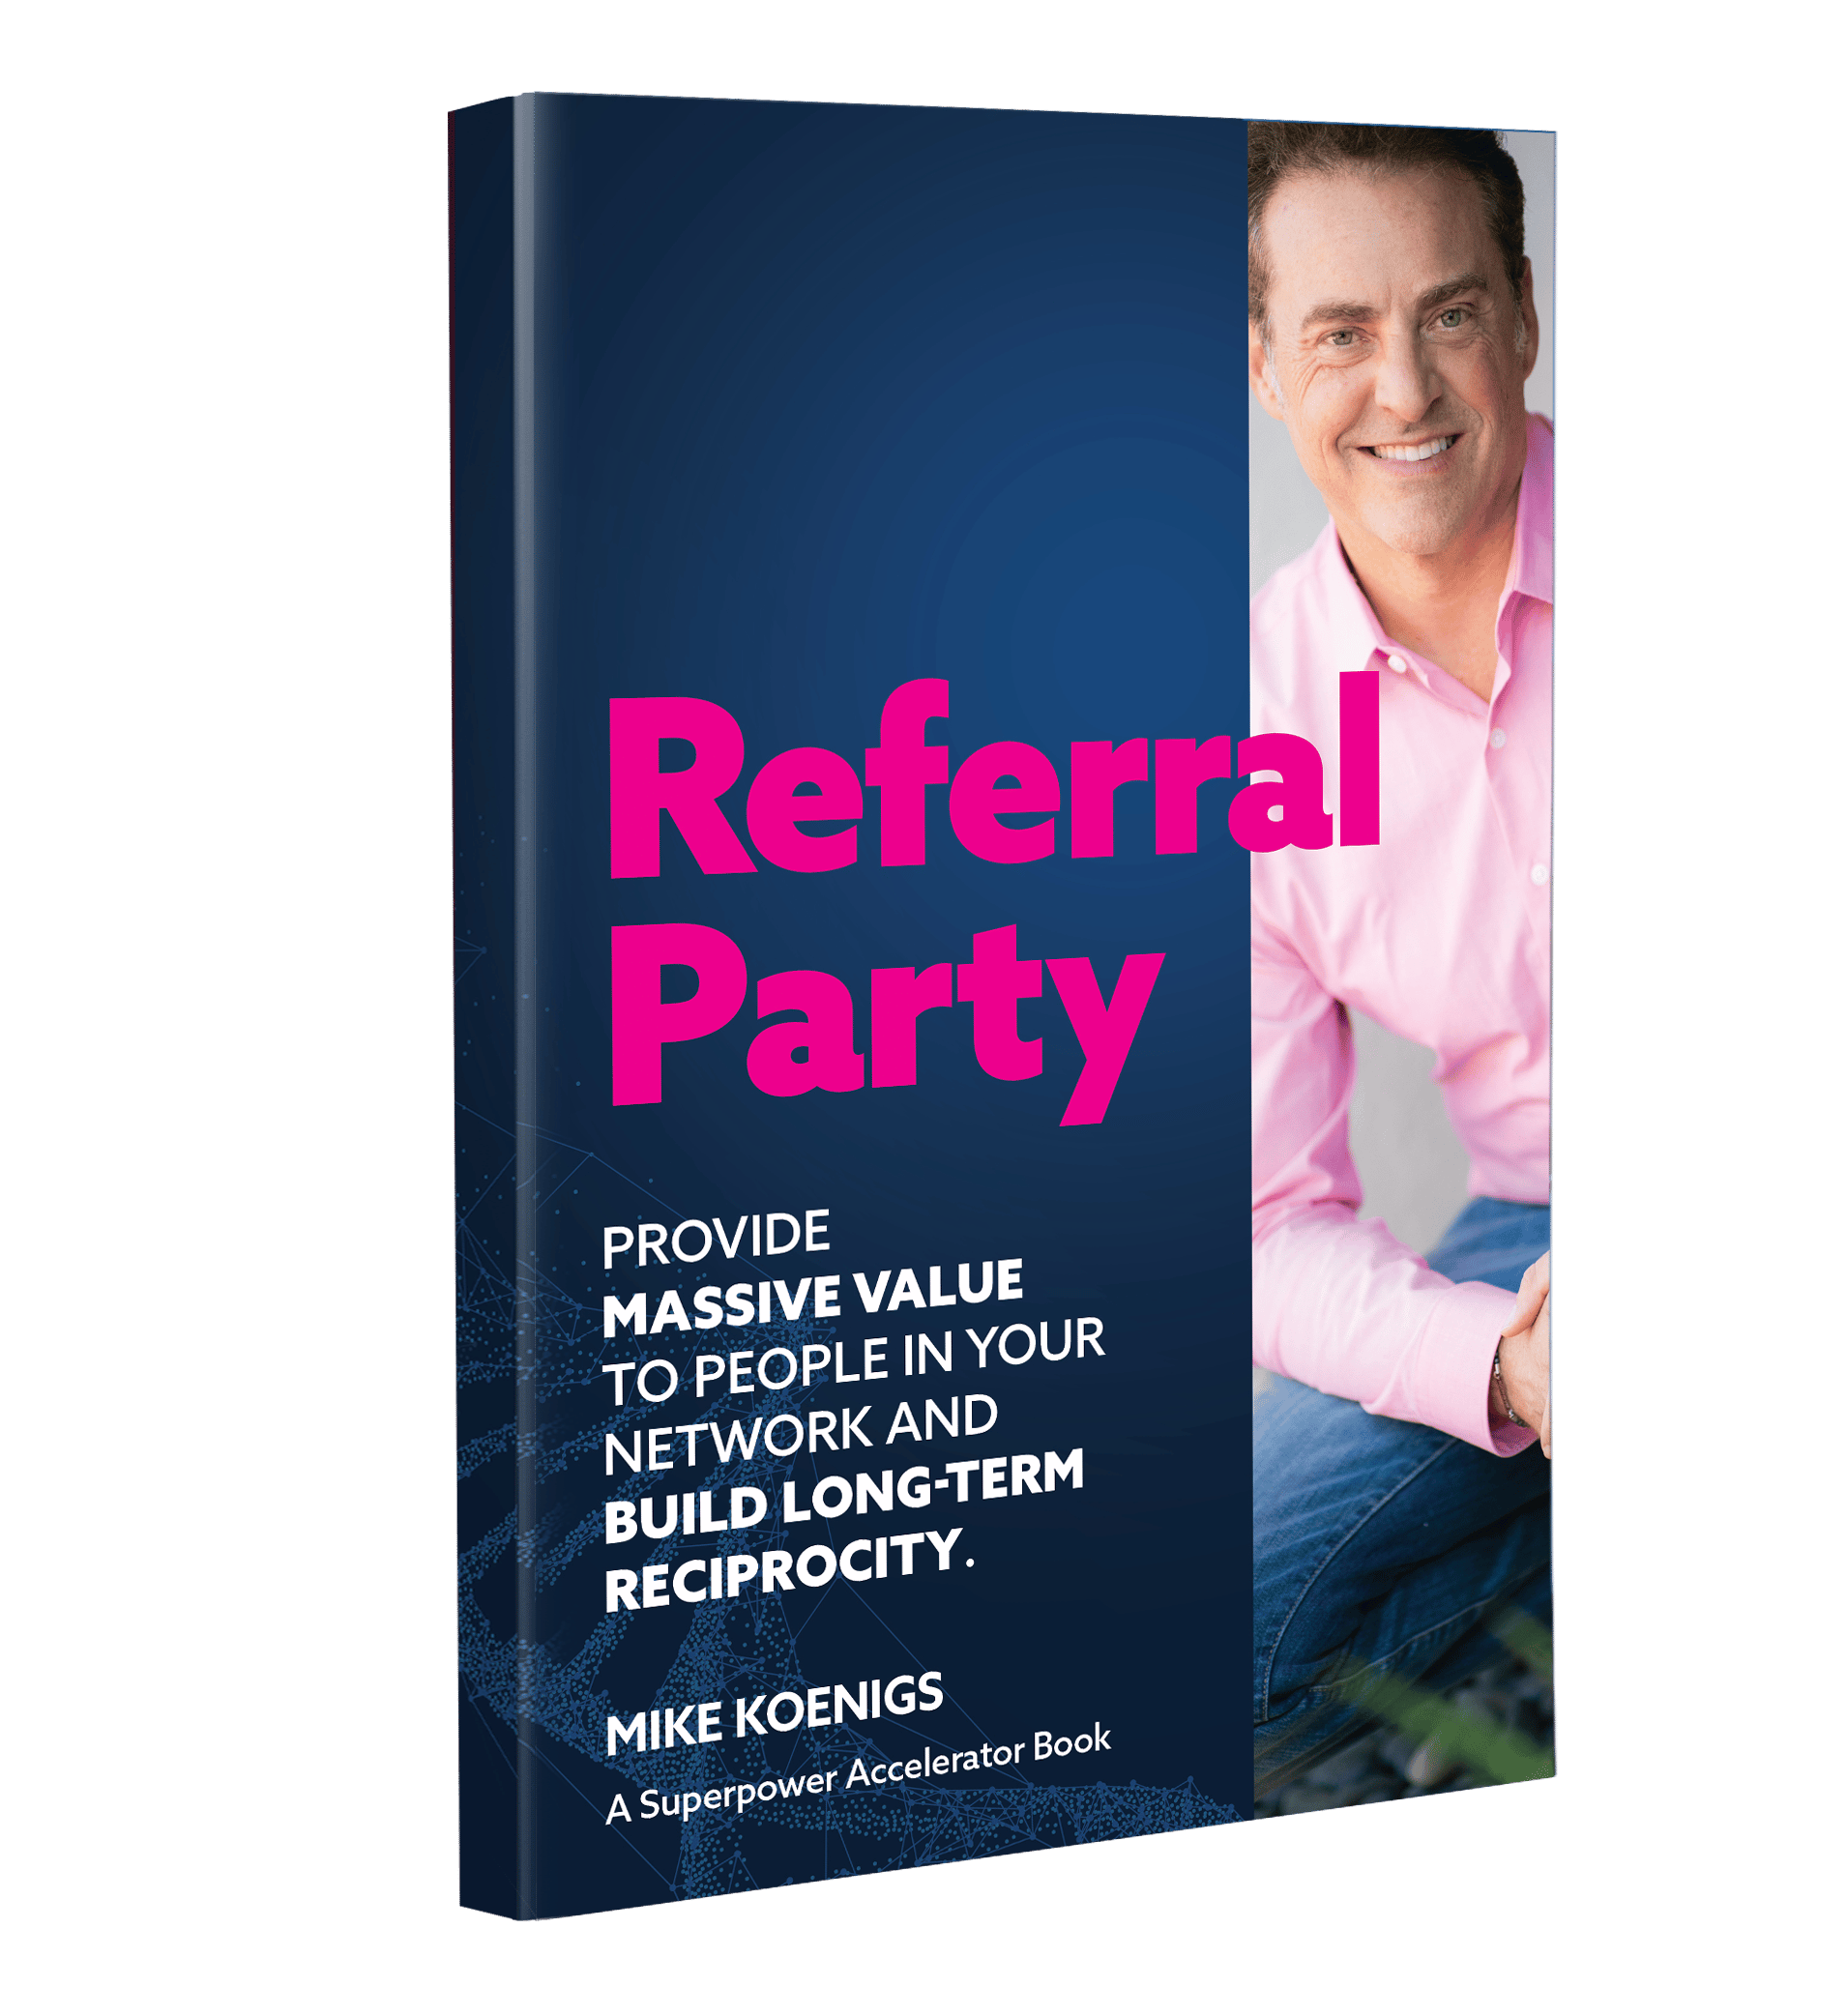 MK_Referral Party Book cover_3D_081722 2